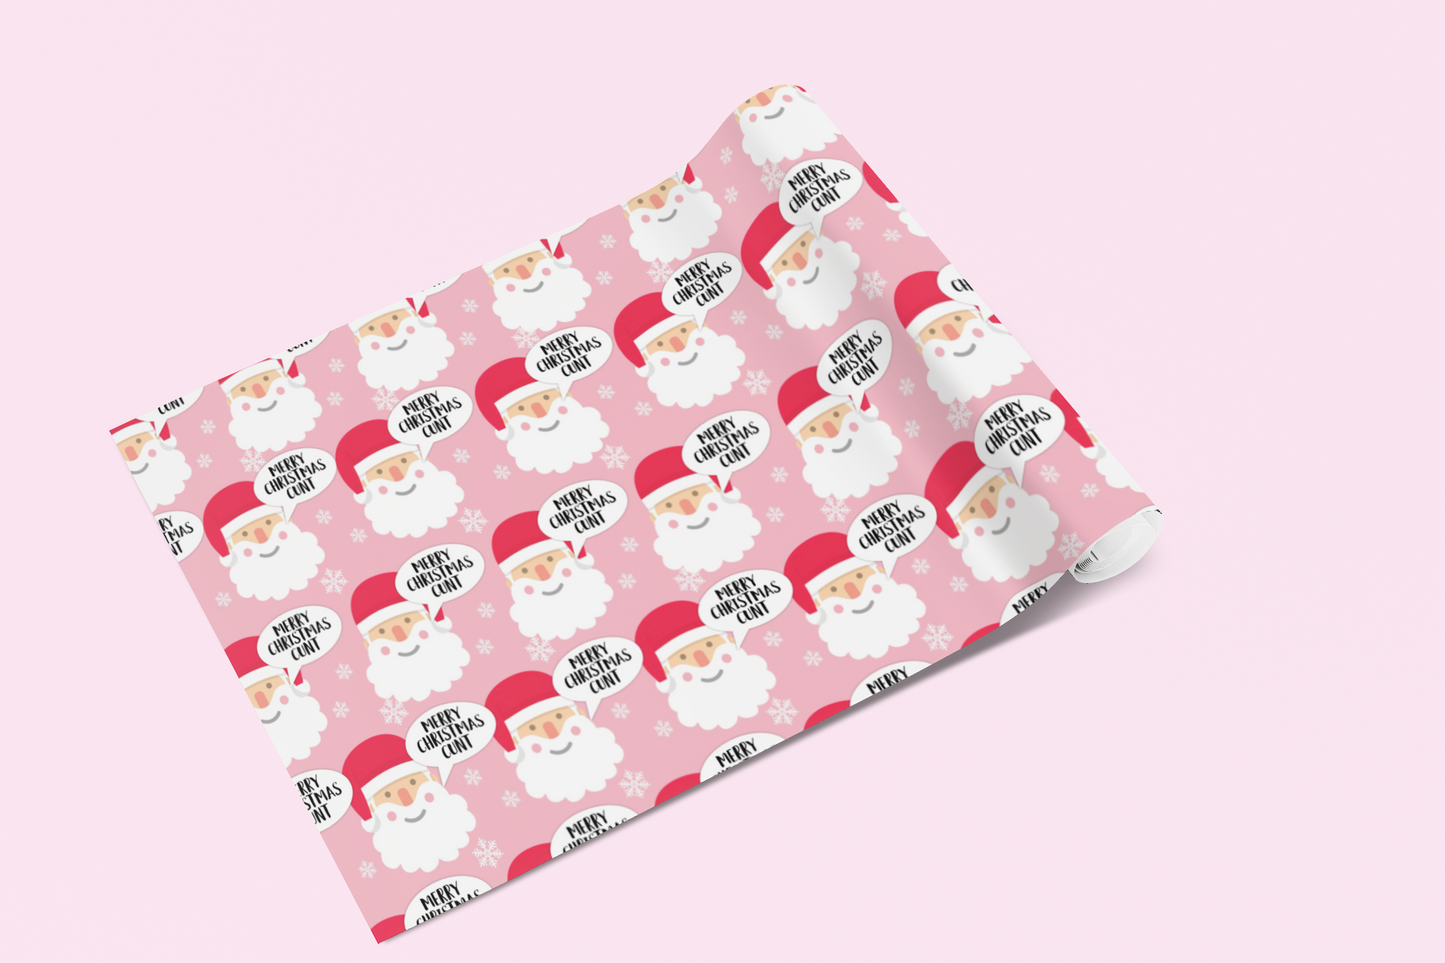 A roll of gift wrap laid out on to a pink surface. Features a funny repetitive quote 'merry christmas you c*nt' in speech bubbles, with santa heads on a pink background.